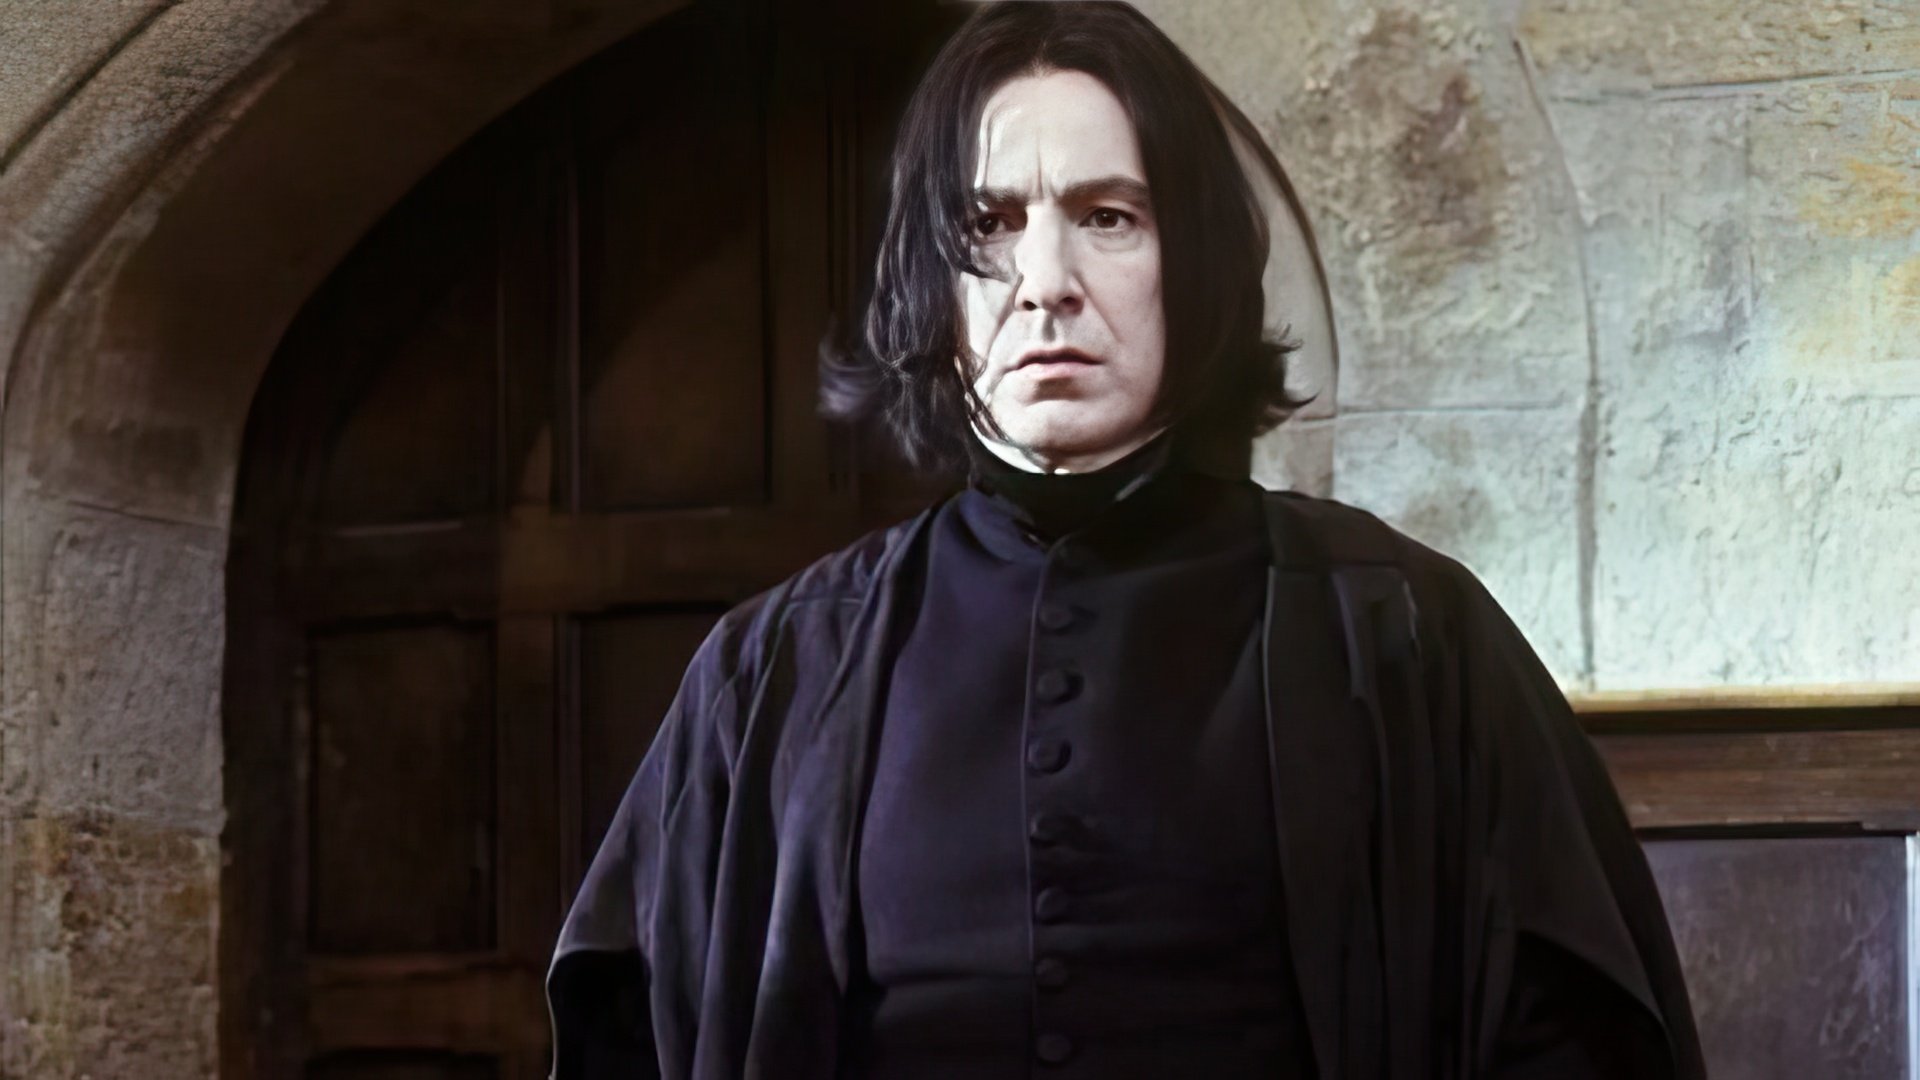 J.K. Rowling personally invited Rickman to the role of Severus Snape